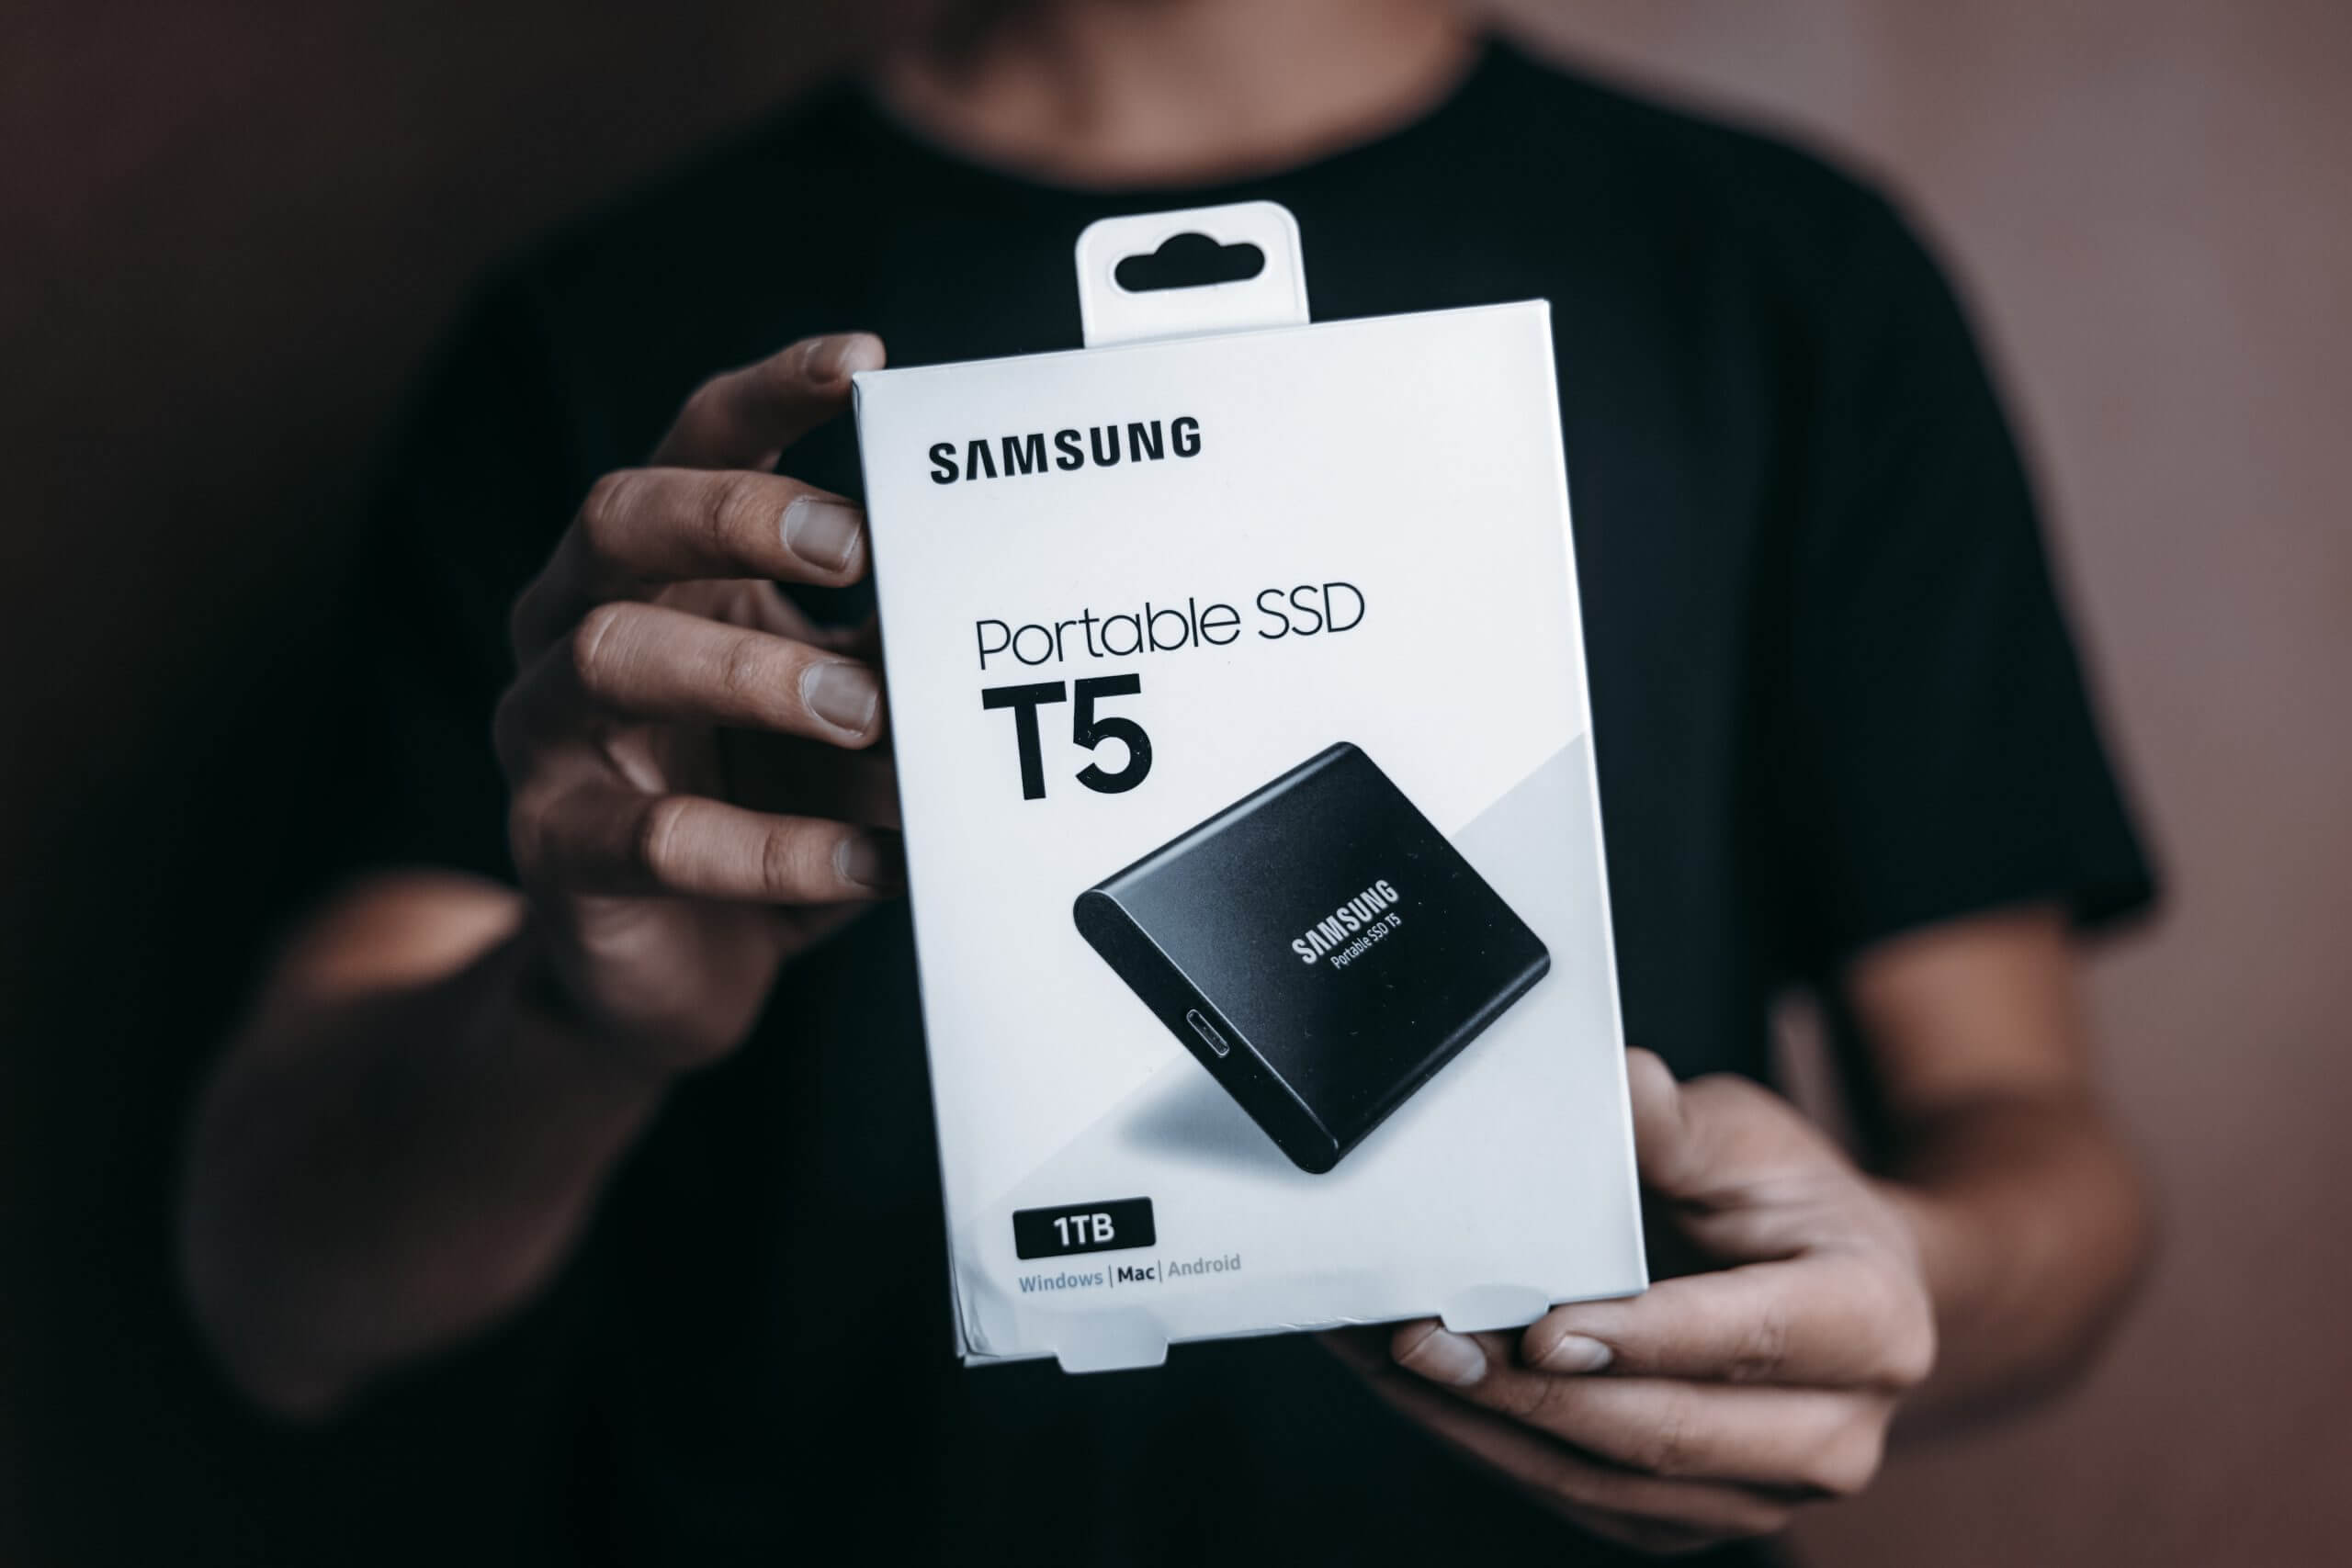 secure backup solution with Samsung external hdd